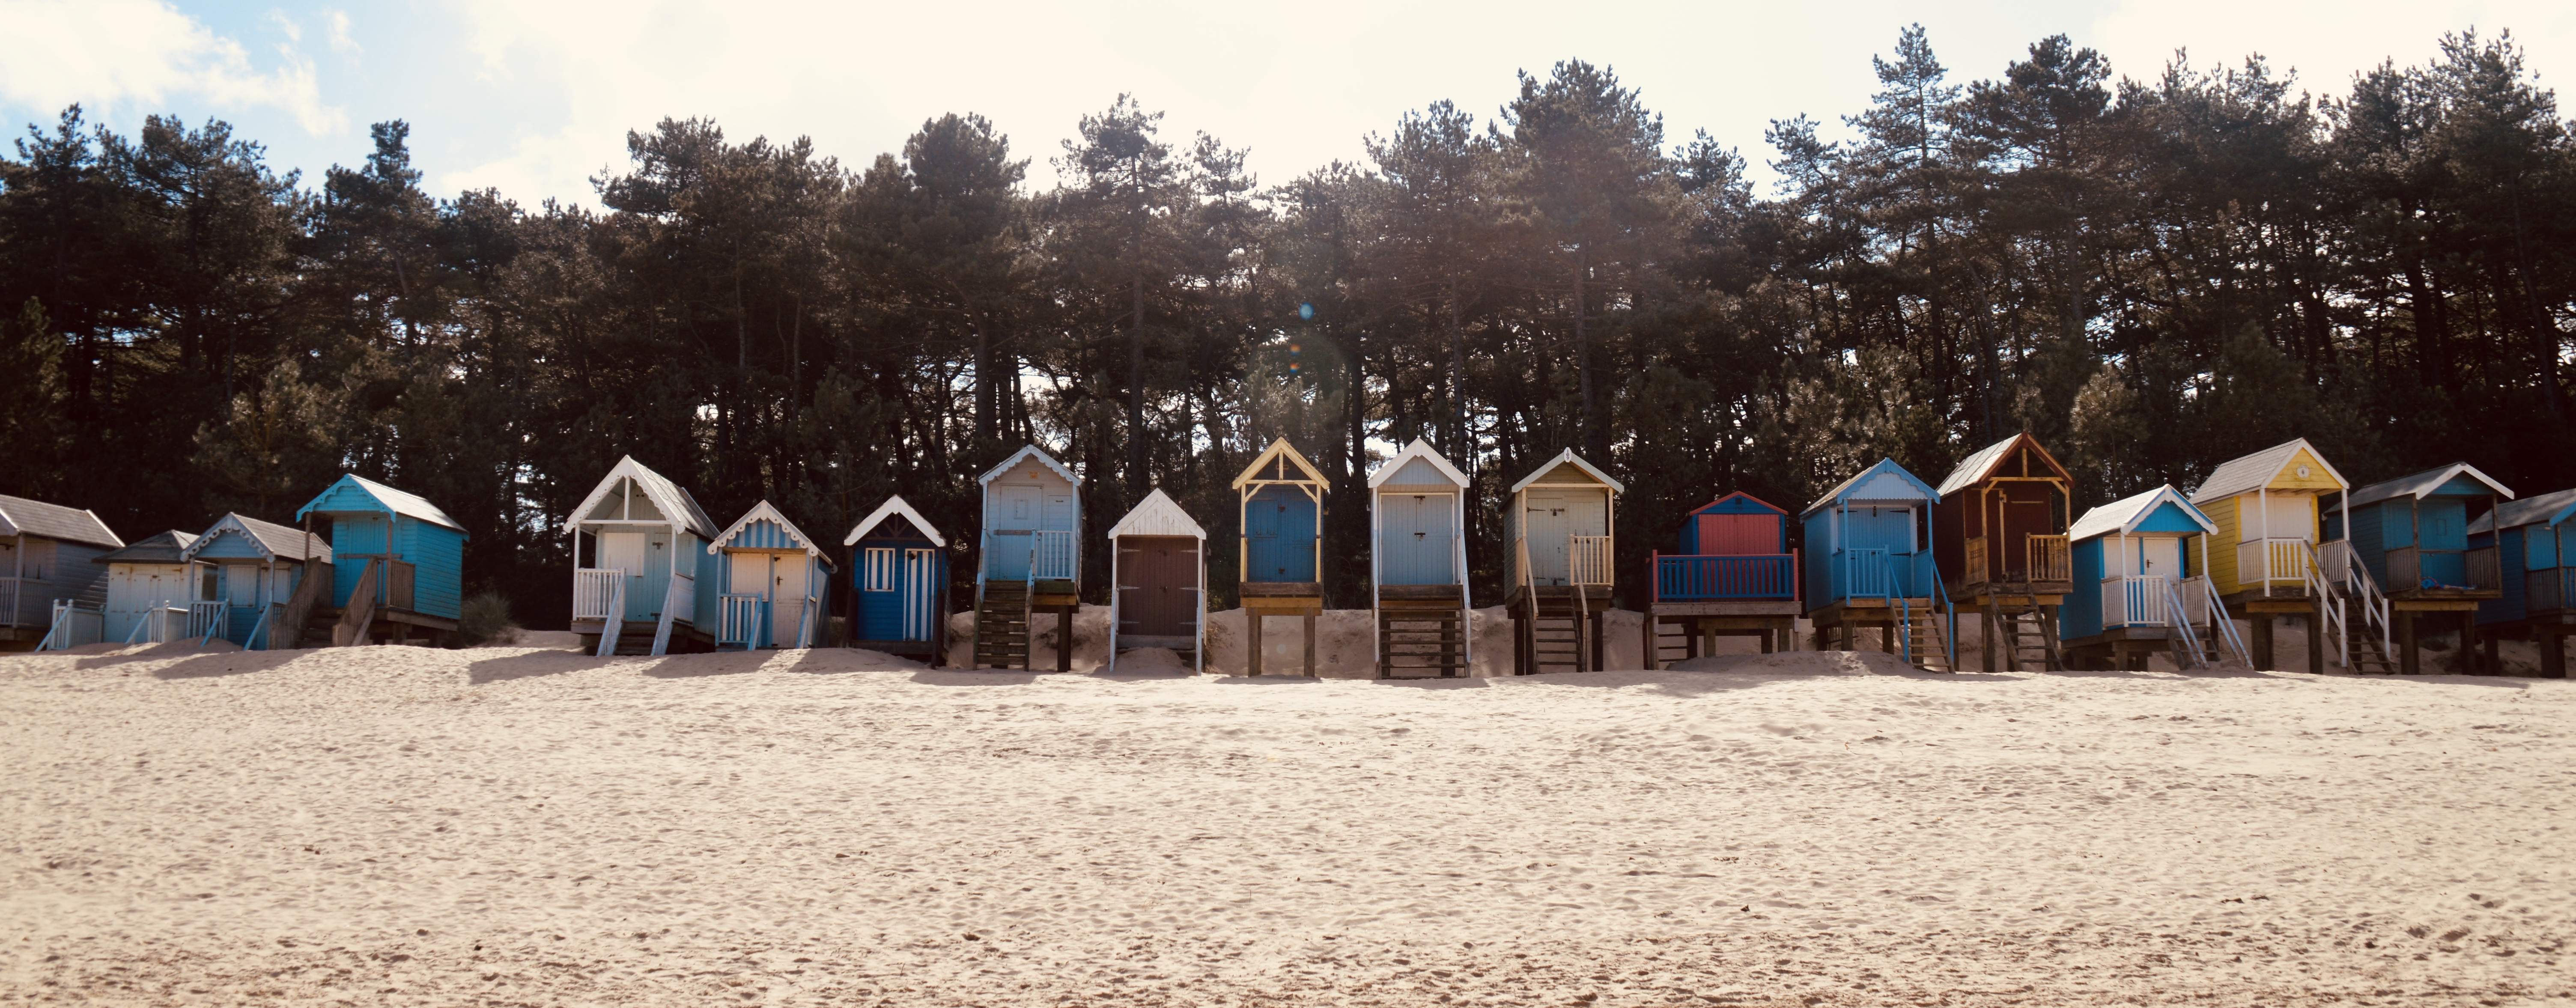 More of the beach huts from Wells Next The Sea